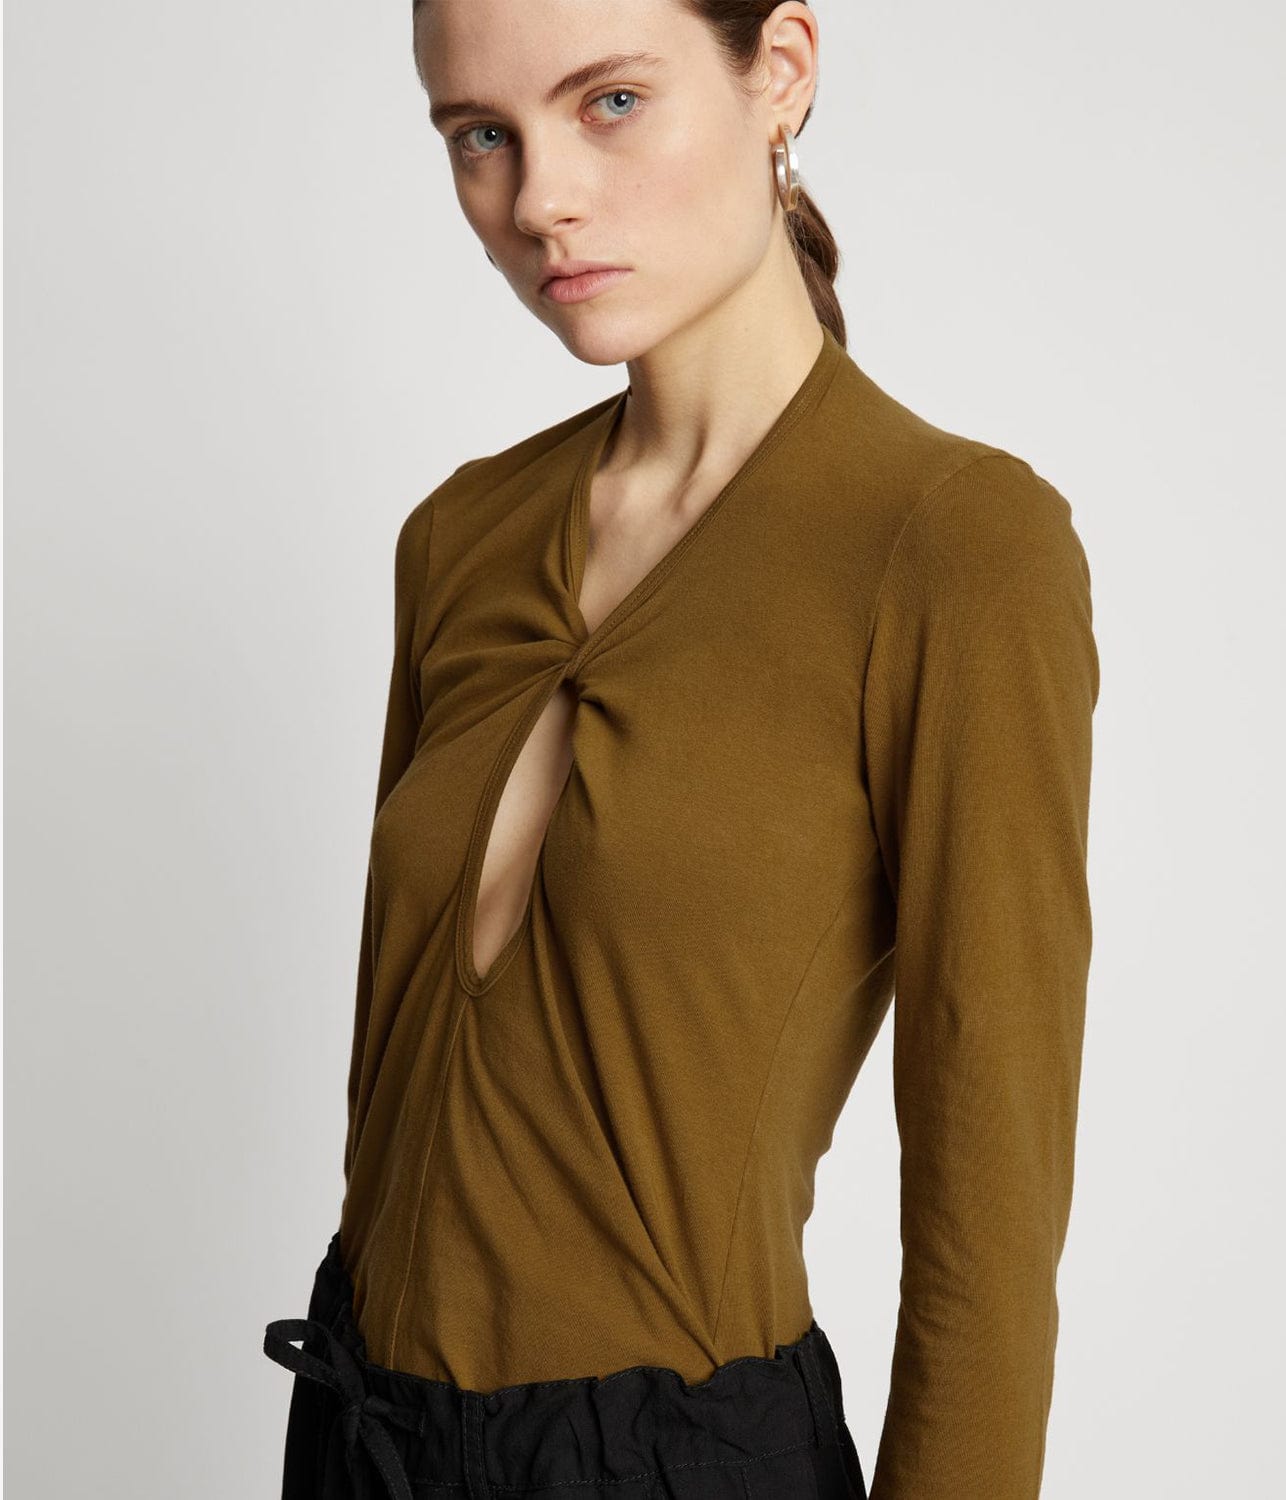 JERSEY KEYHOLE TOP-OLIVE | PROENZA SCHOULER WHITE LABEL |  PROENZA SCHOULER WHITE LABEL JERSEY KEYHOLE TOP-OLIVE